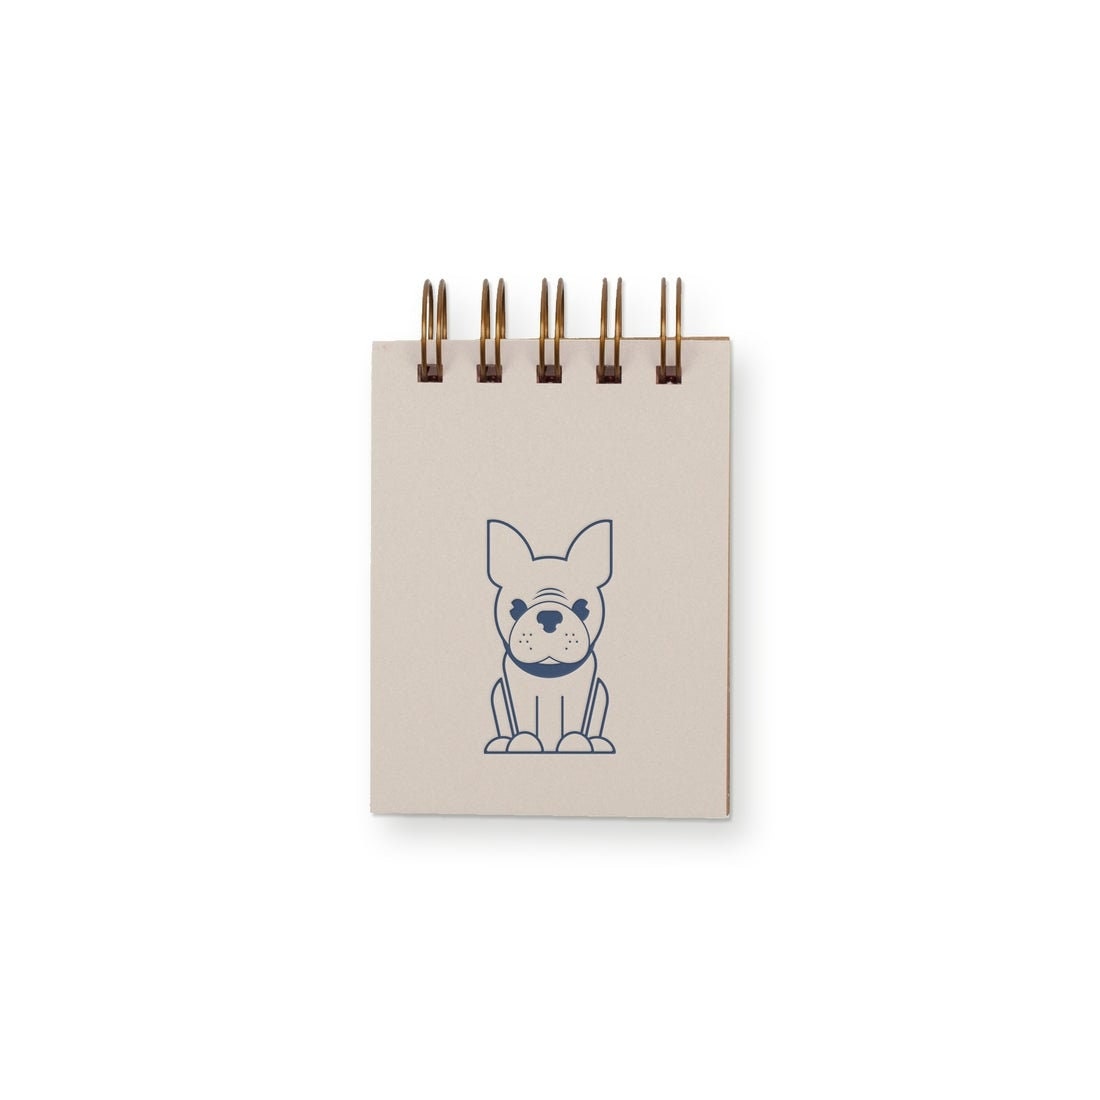 Mini Jotters Frenchie Mini Jotter Notebook - Paws Enrich Plan - Dog, Puppy, Nature & Adventure Inspired Stationery